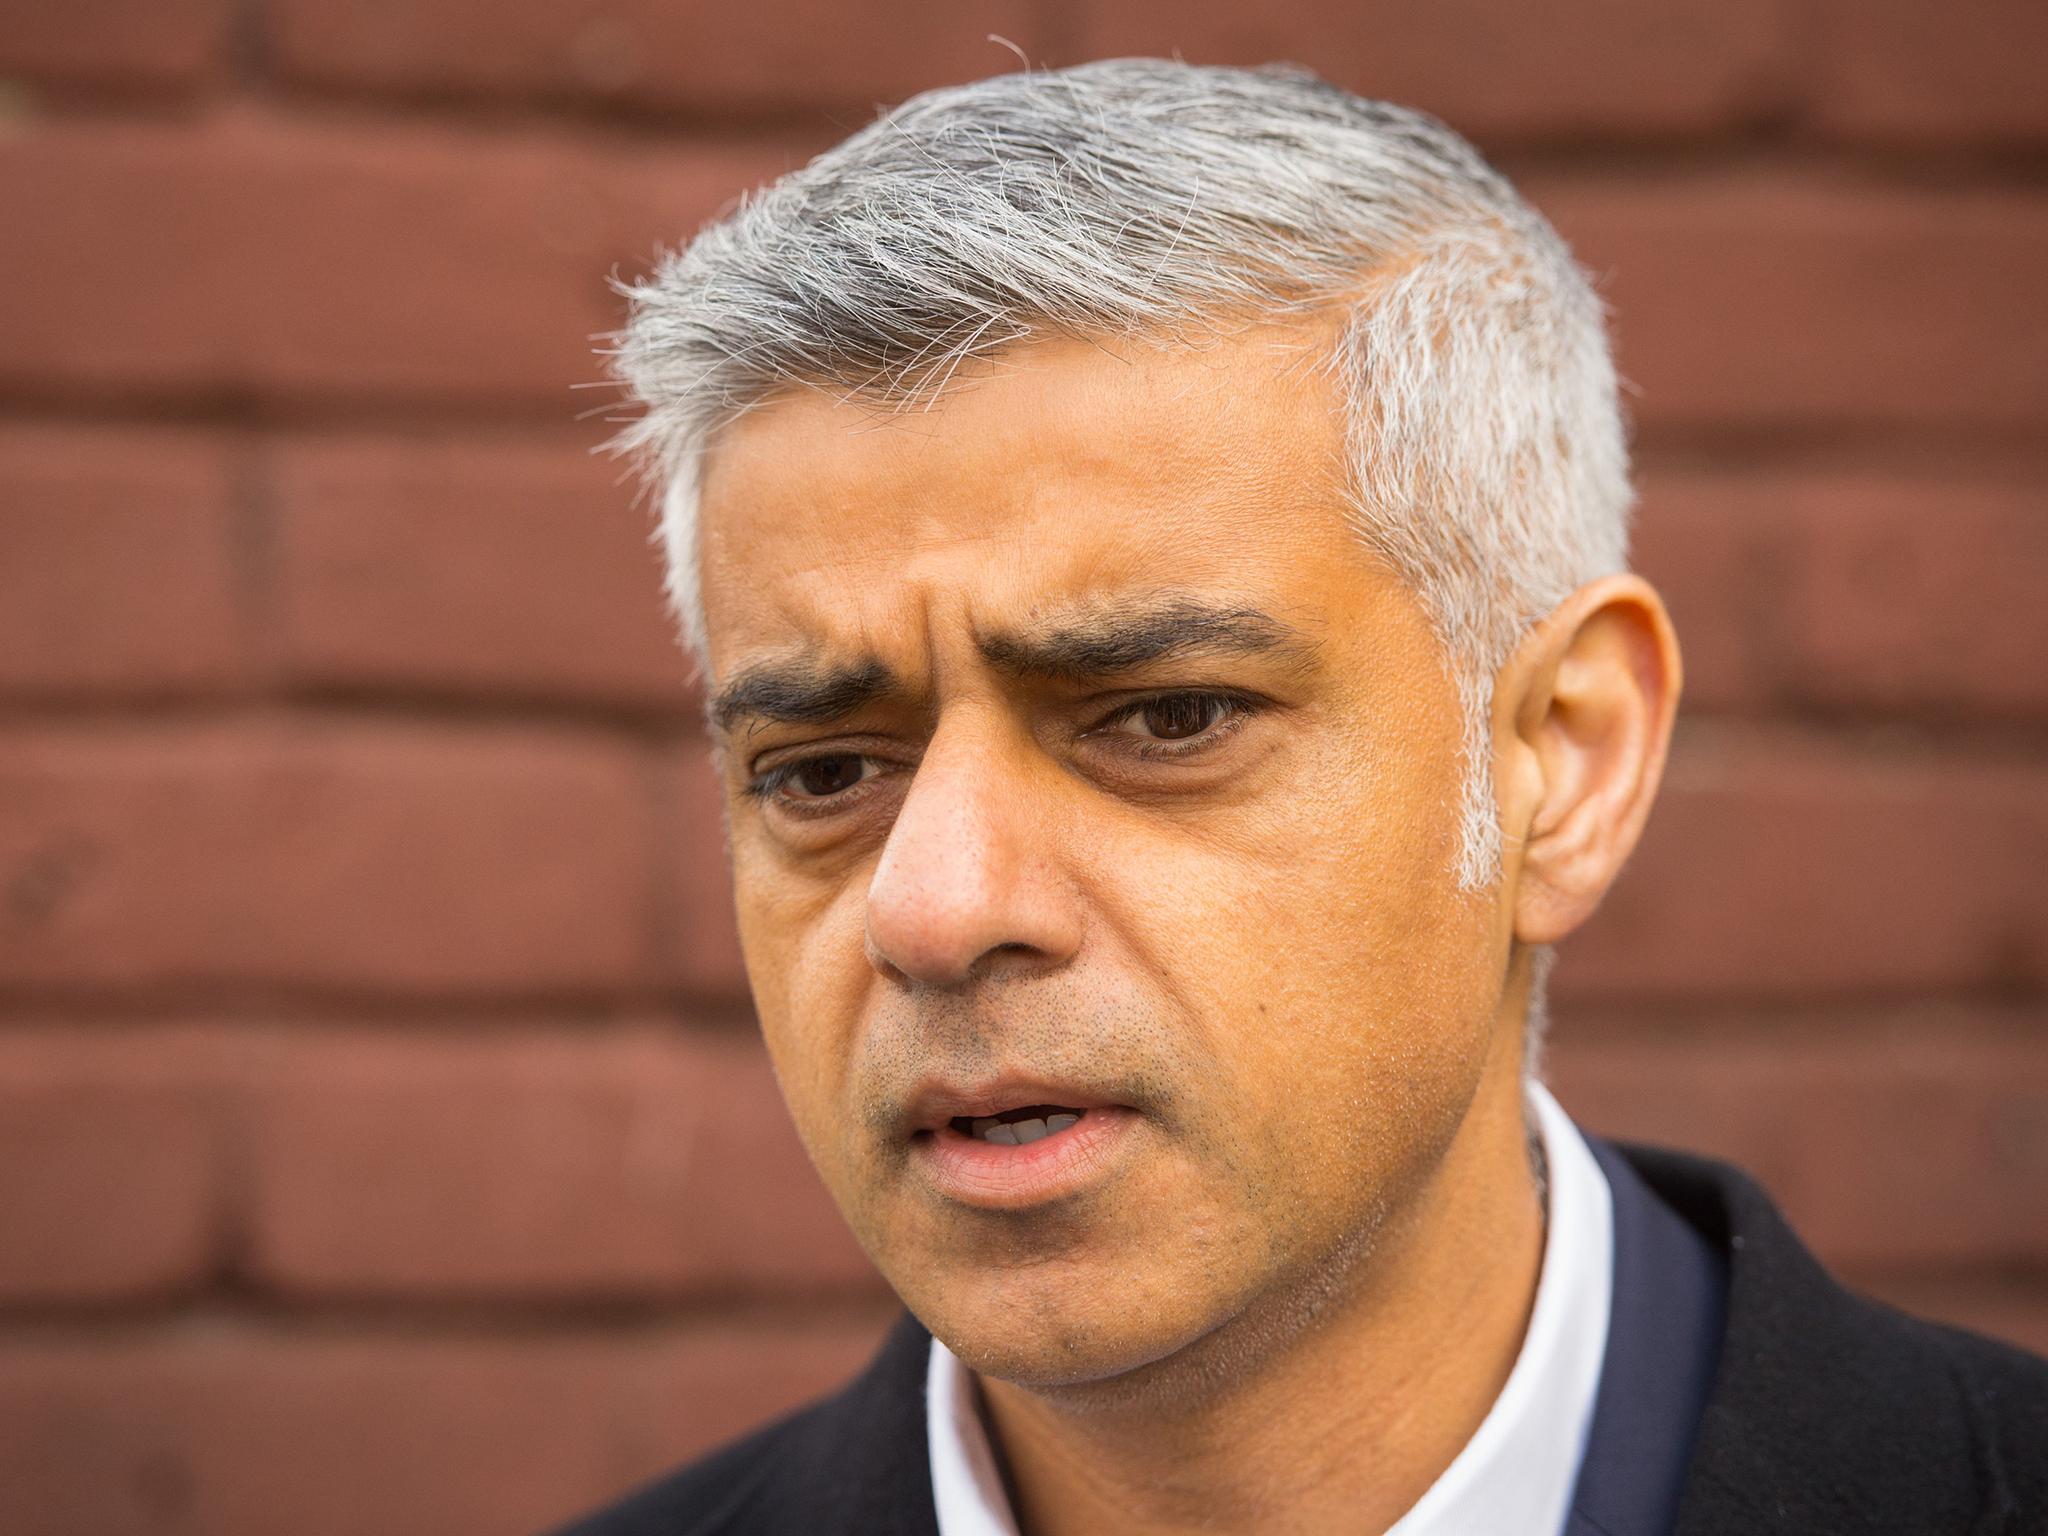 Sadiq Khan said childhood obesity was 'placing huge pressure on our already strained health service'